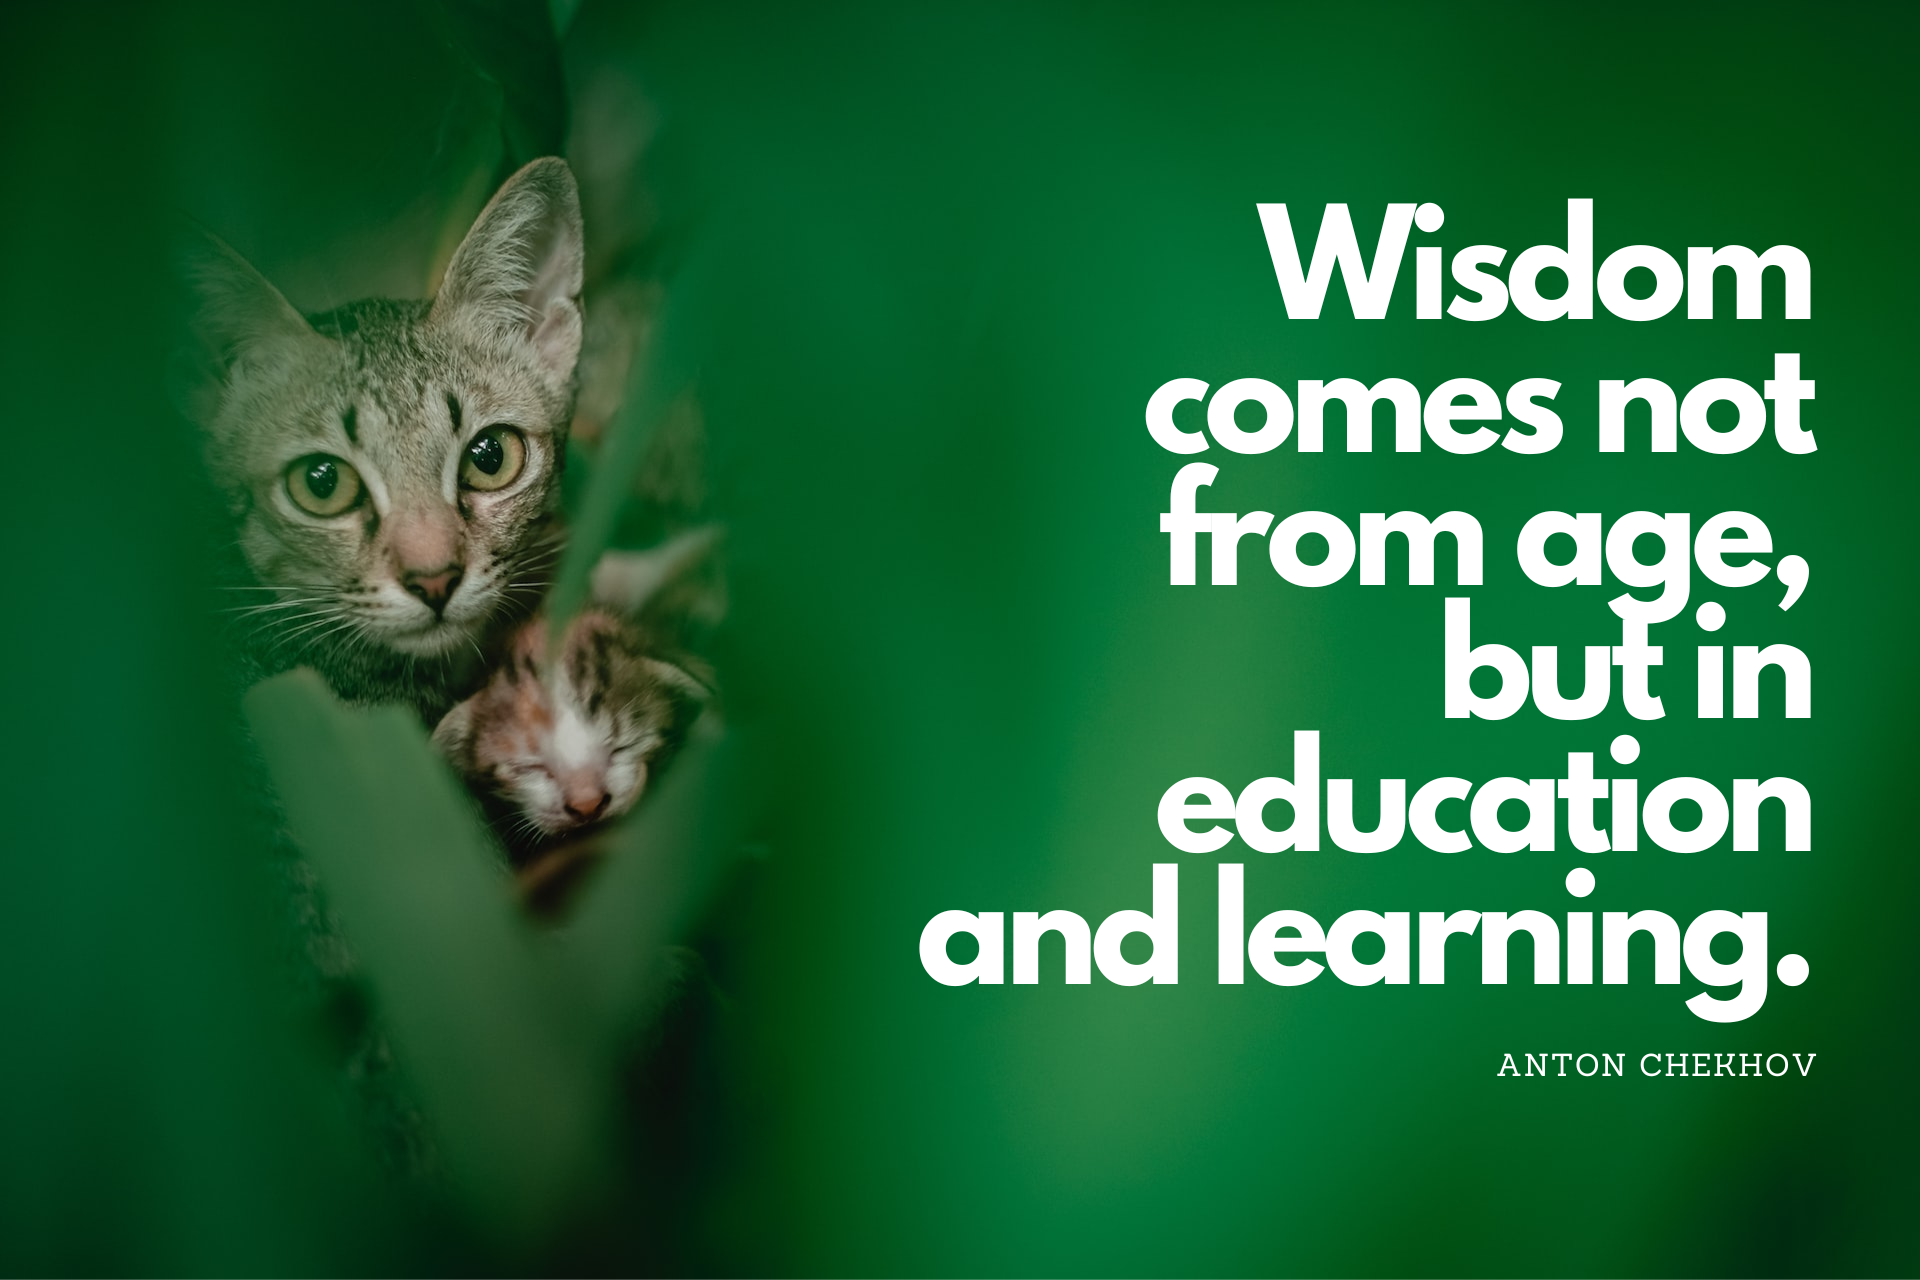 Mother cat with newborn kitten and quote, Wisdom comes not from age, but in education and learning